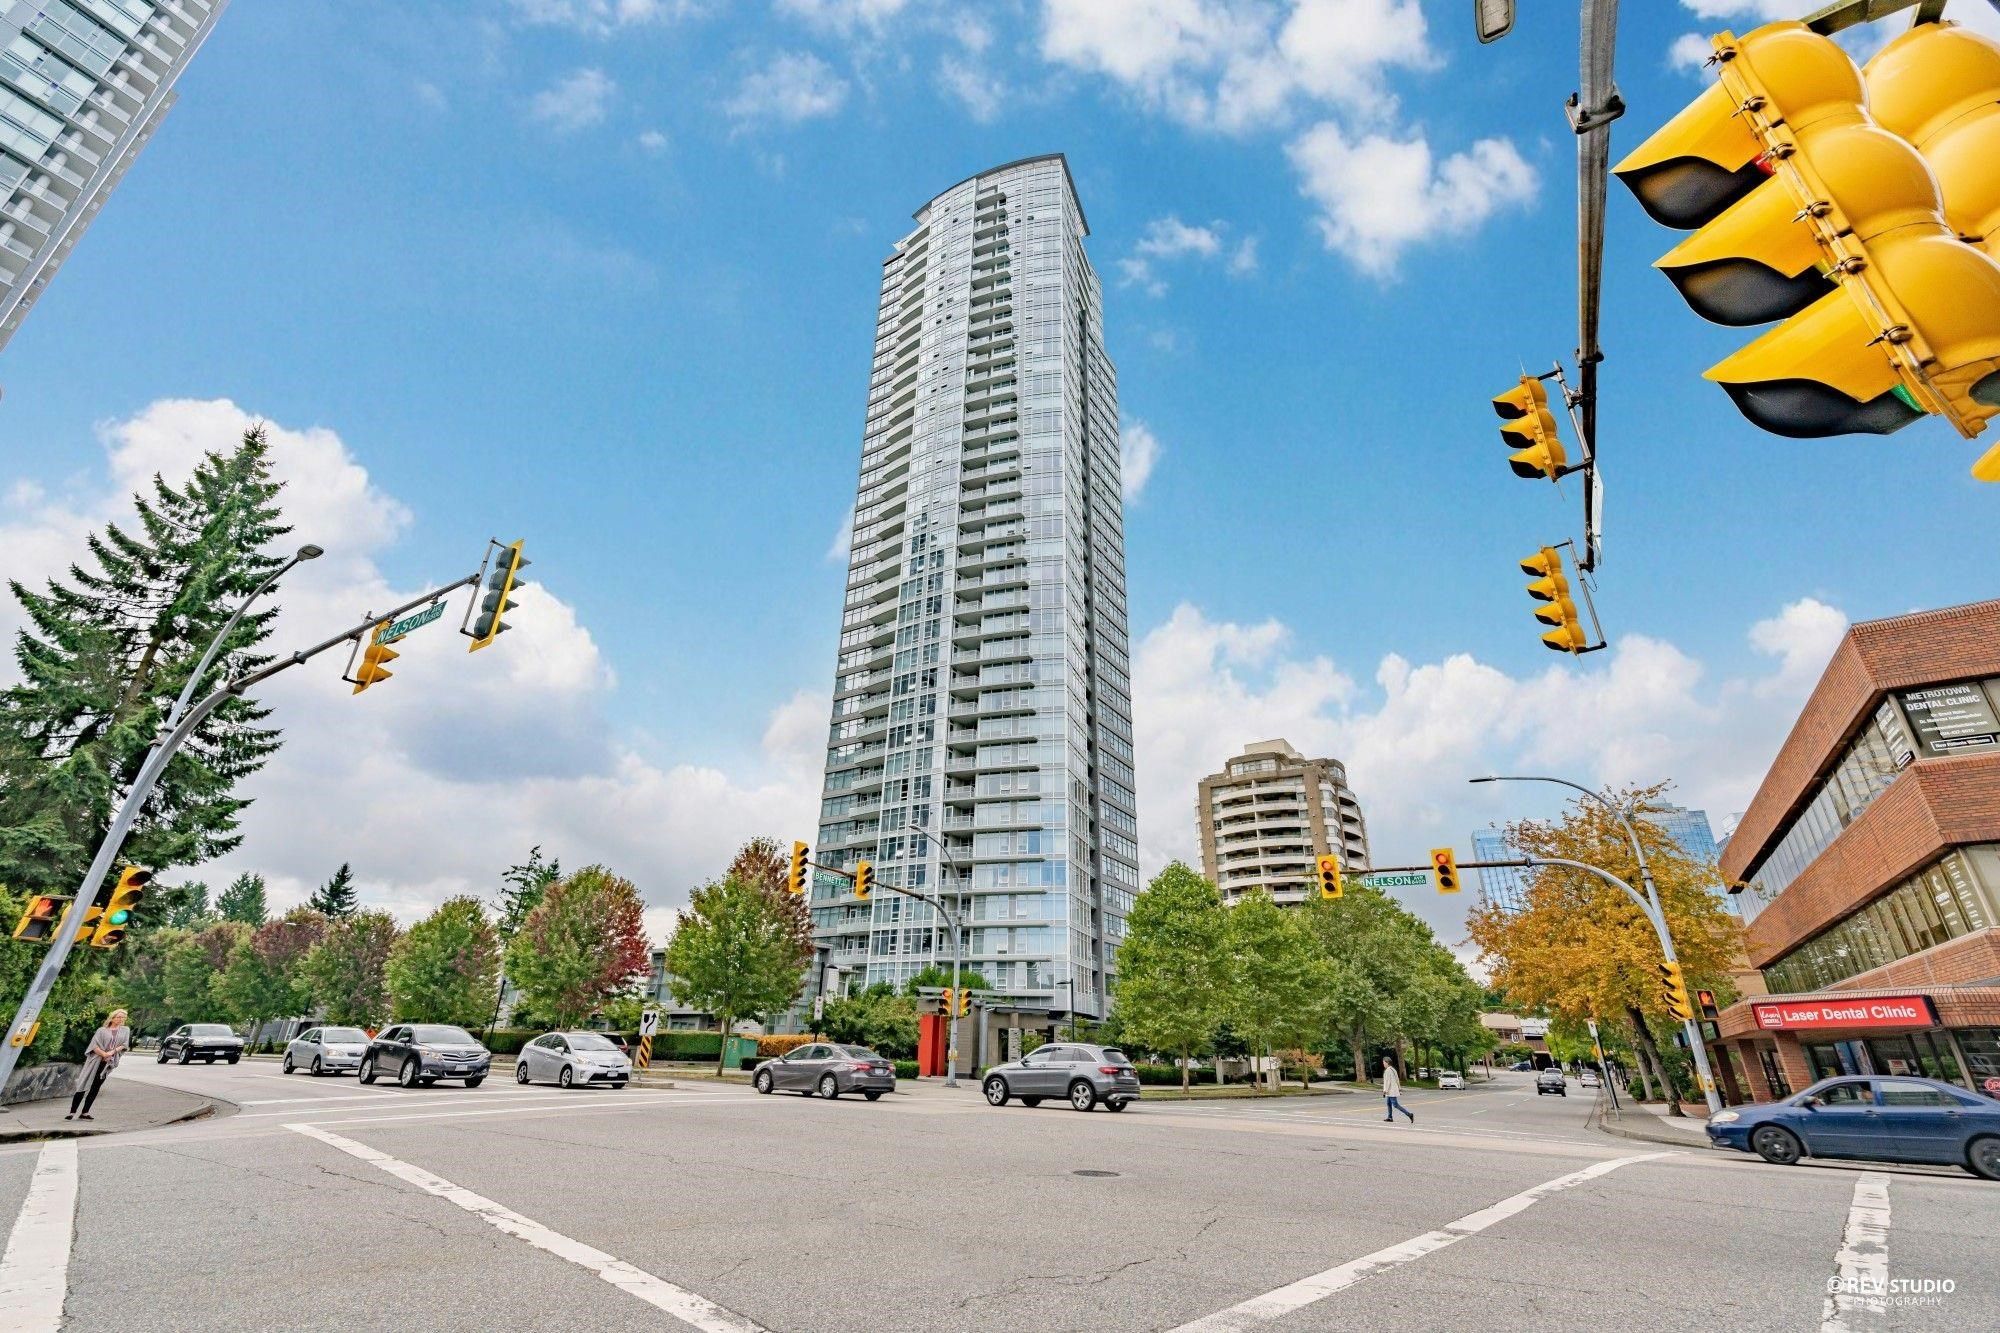 Main Photo: 307 4880 BENNETT Street in Burnaby: Metrotown Condo for sale (Burnaby South)  : MLS®# R2631769